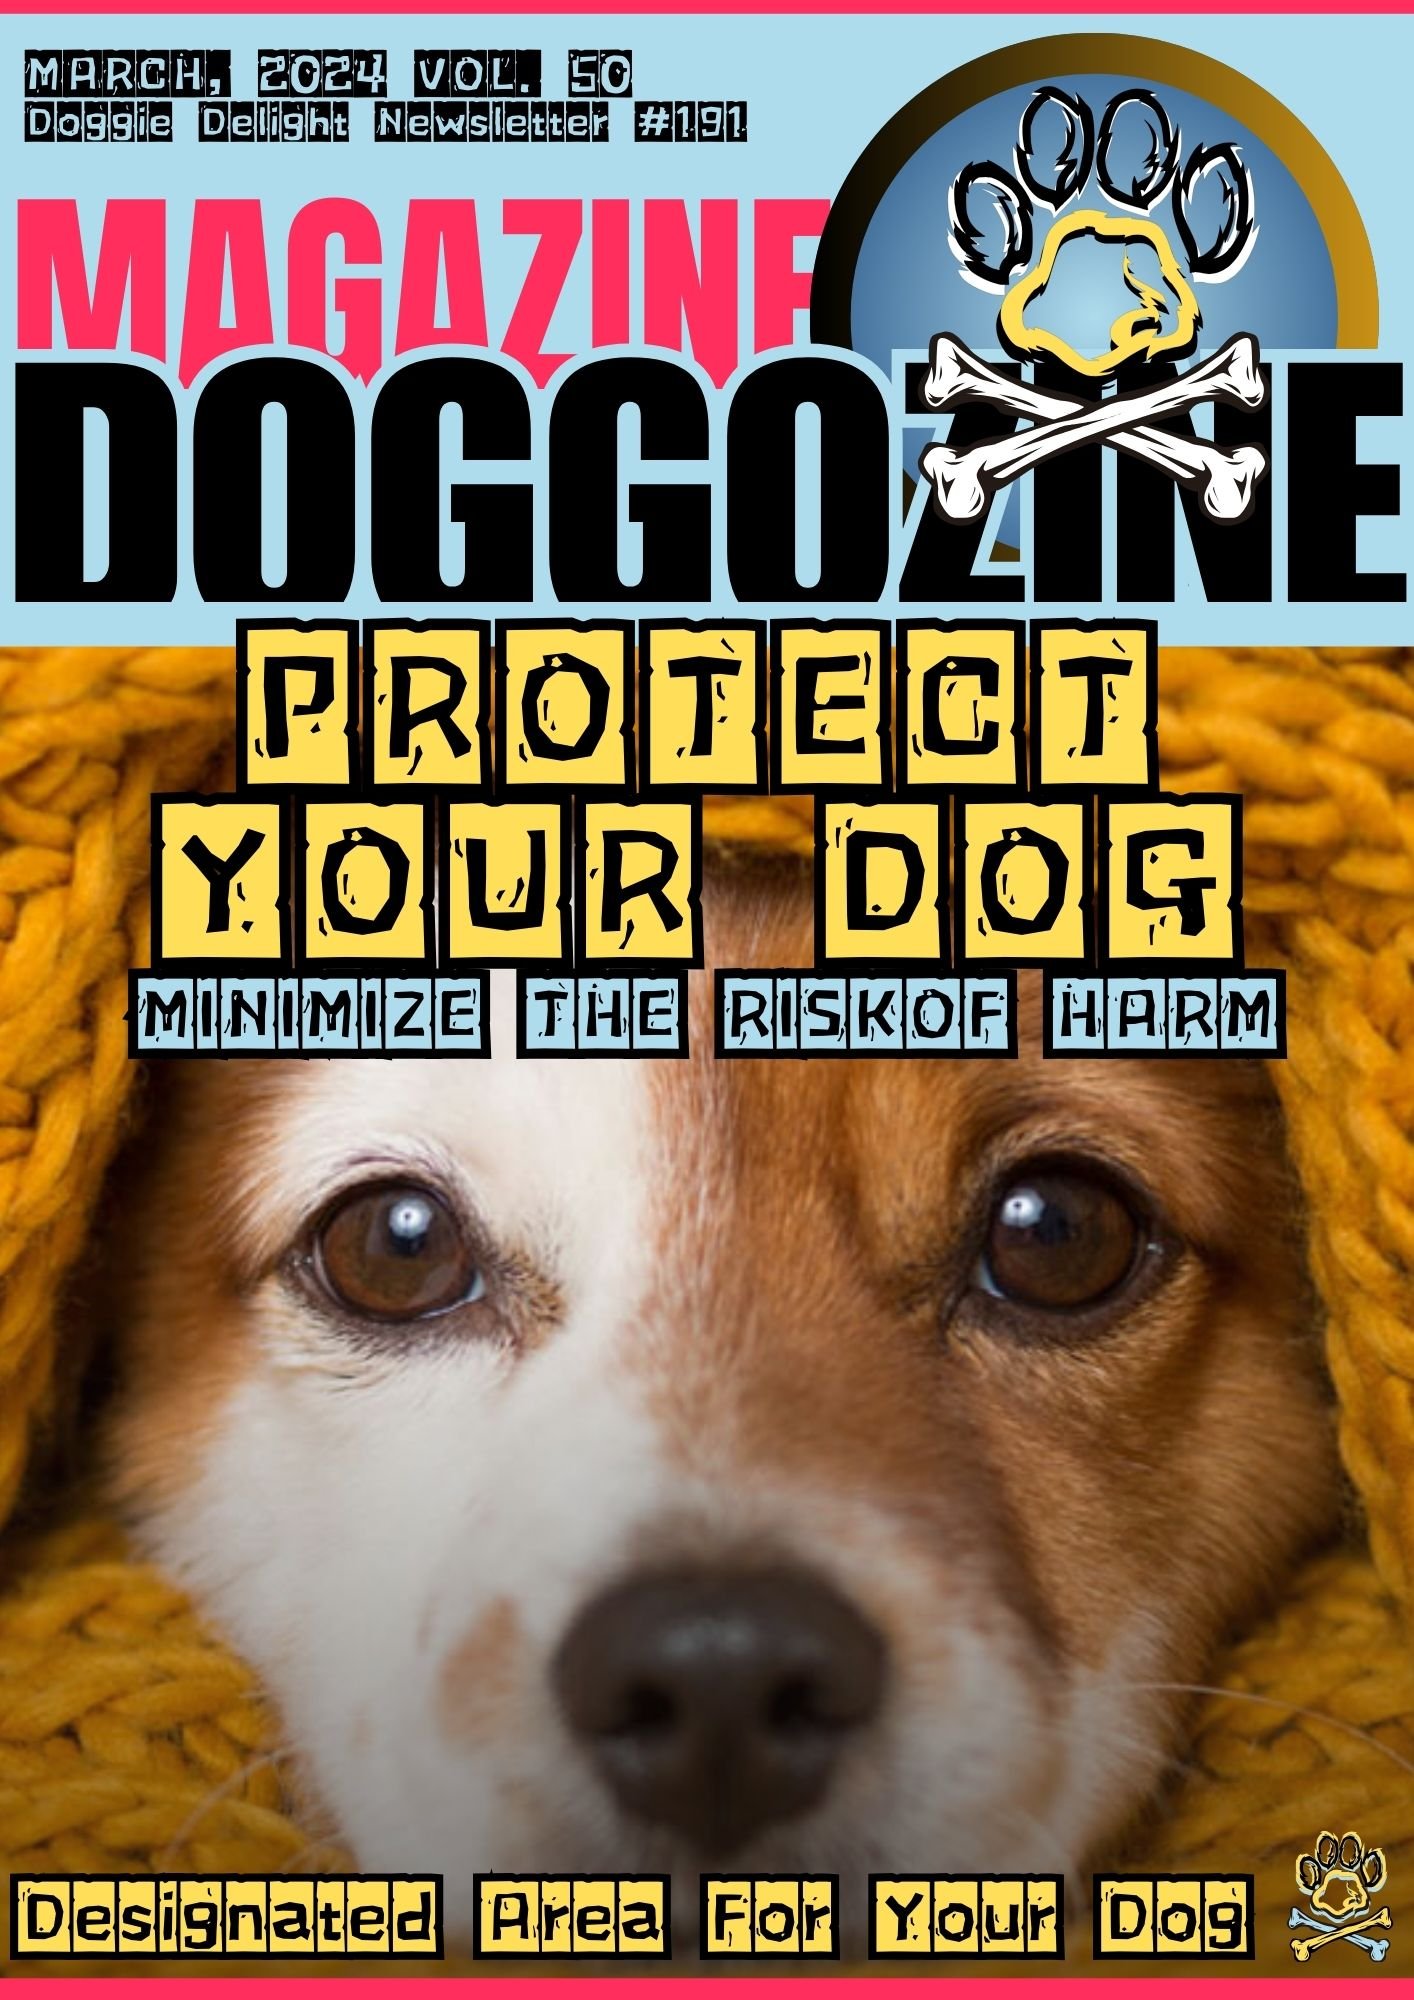 PROTECT YOUR DOG